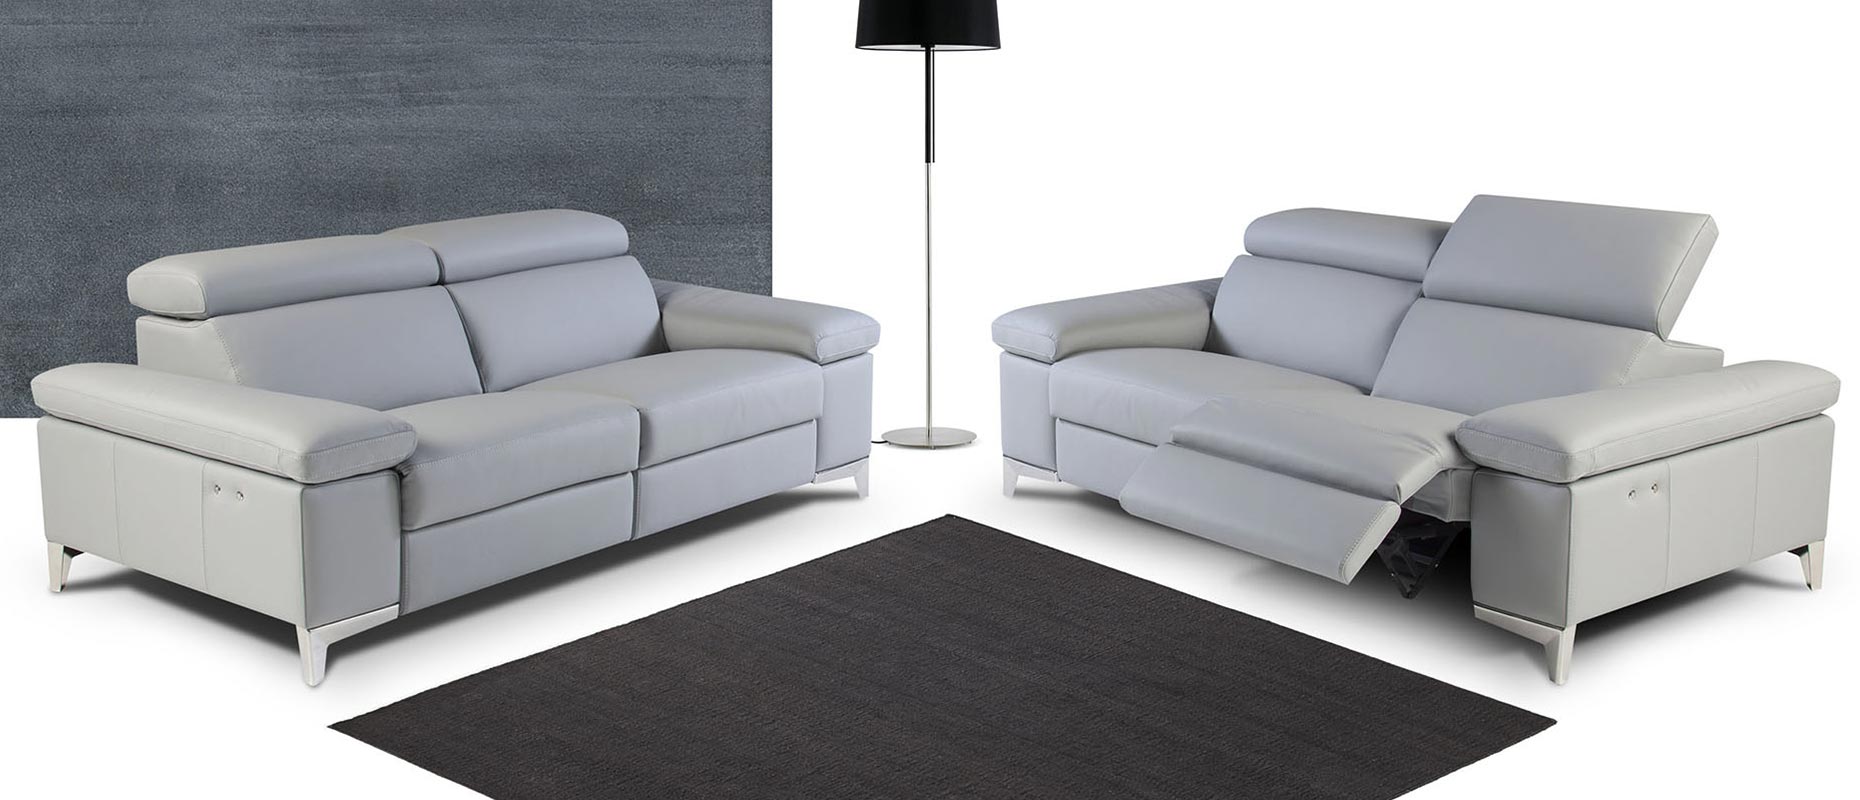 Turandot Leather sofa collection at Forrest Furnishing